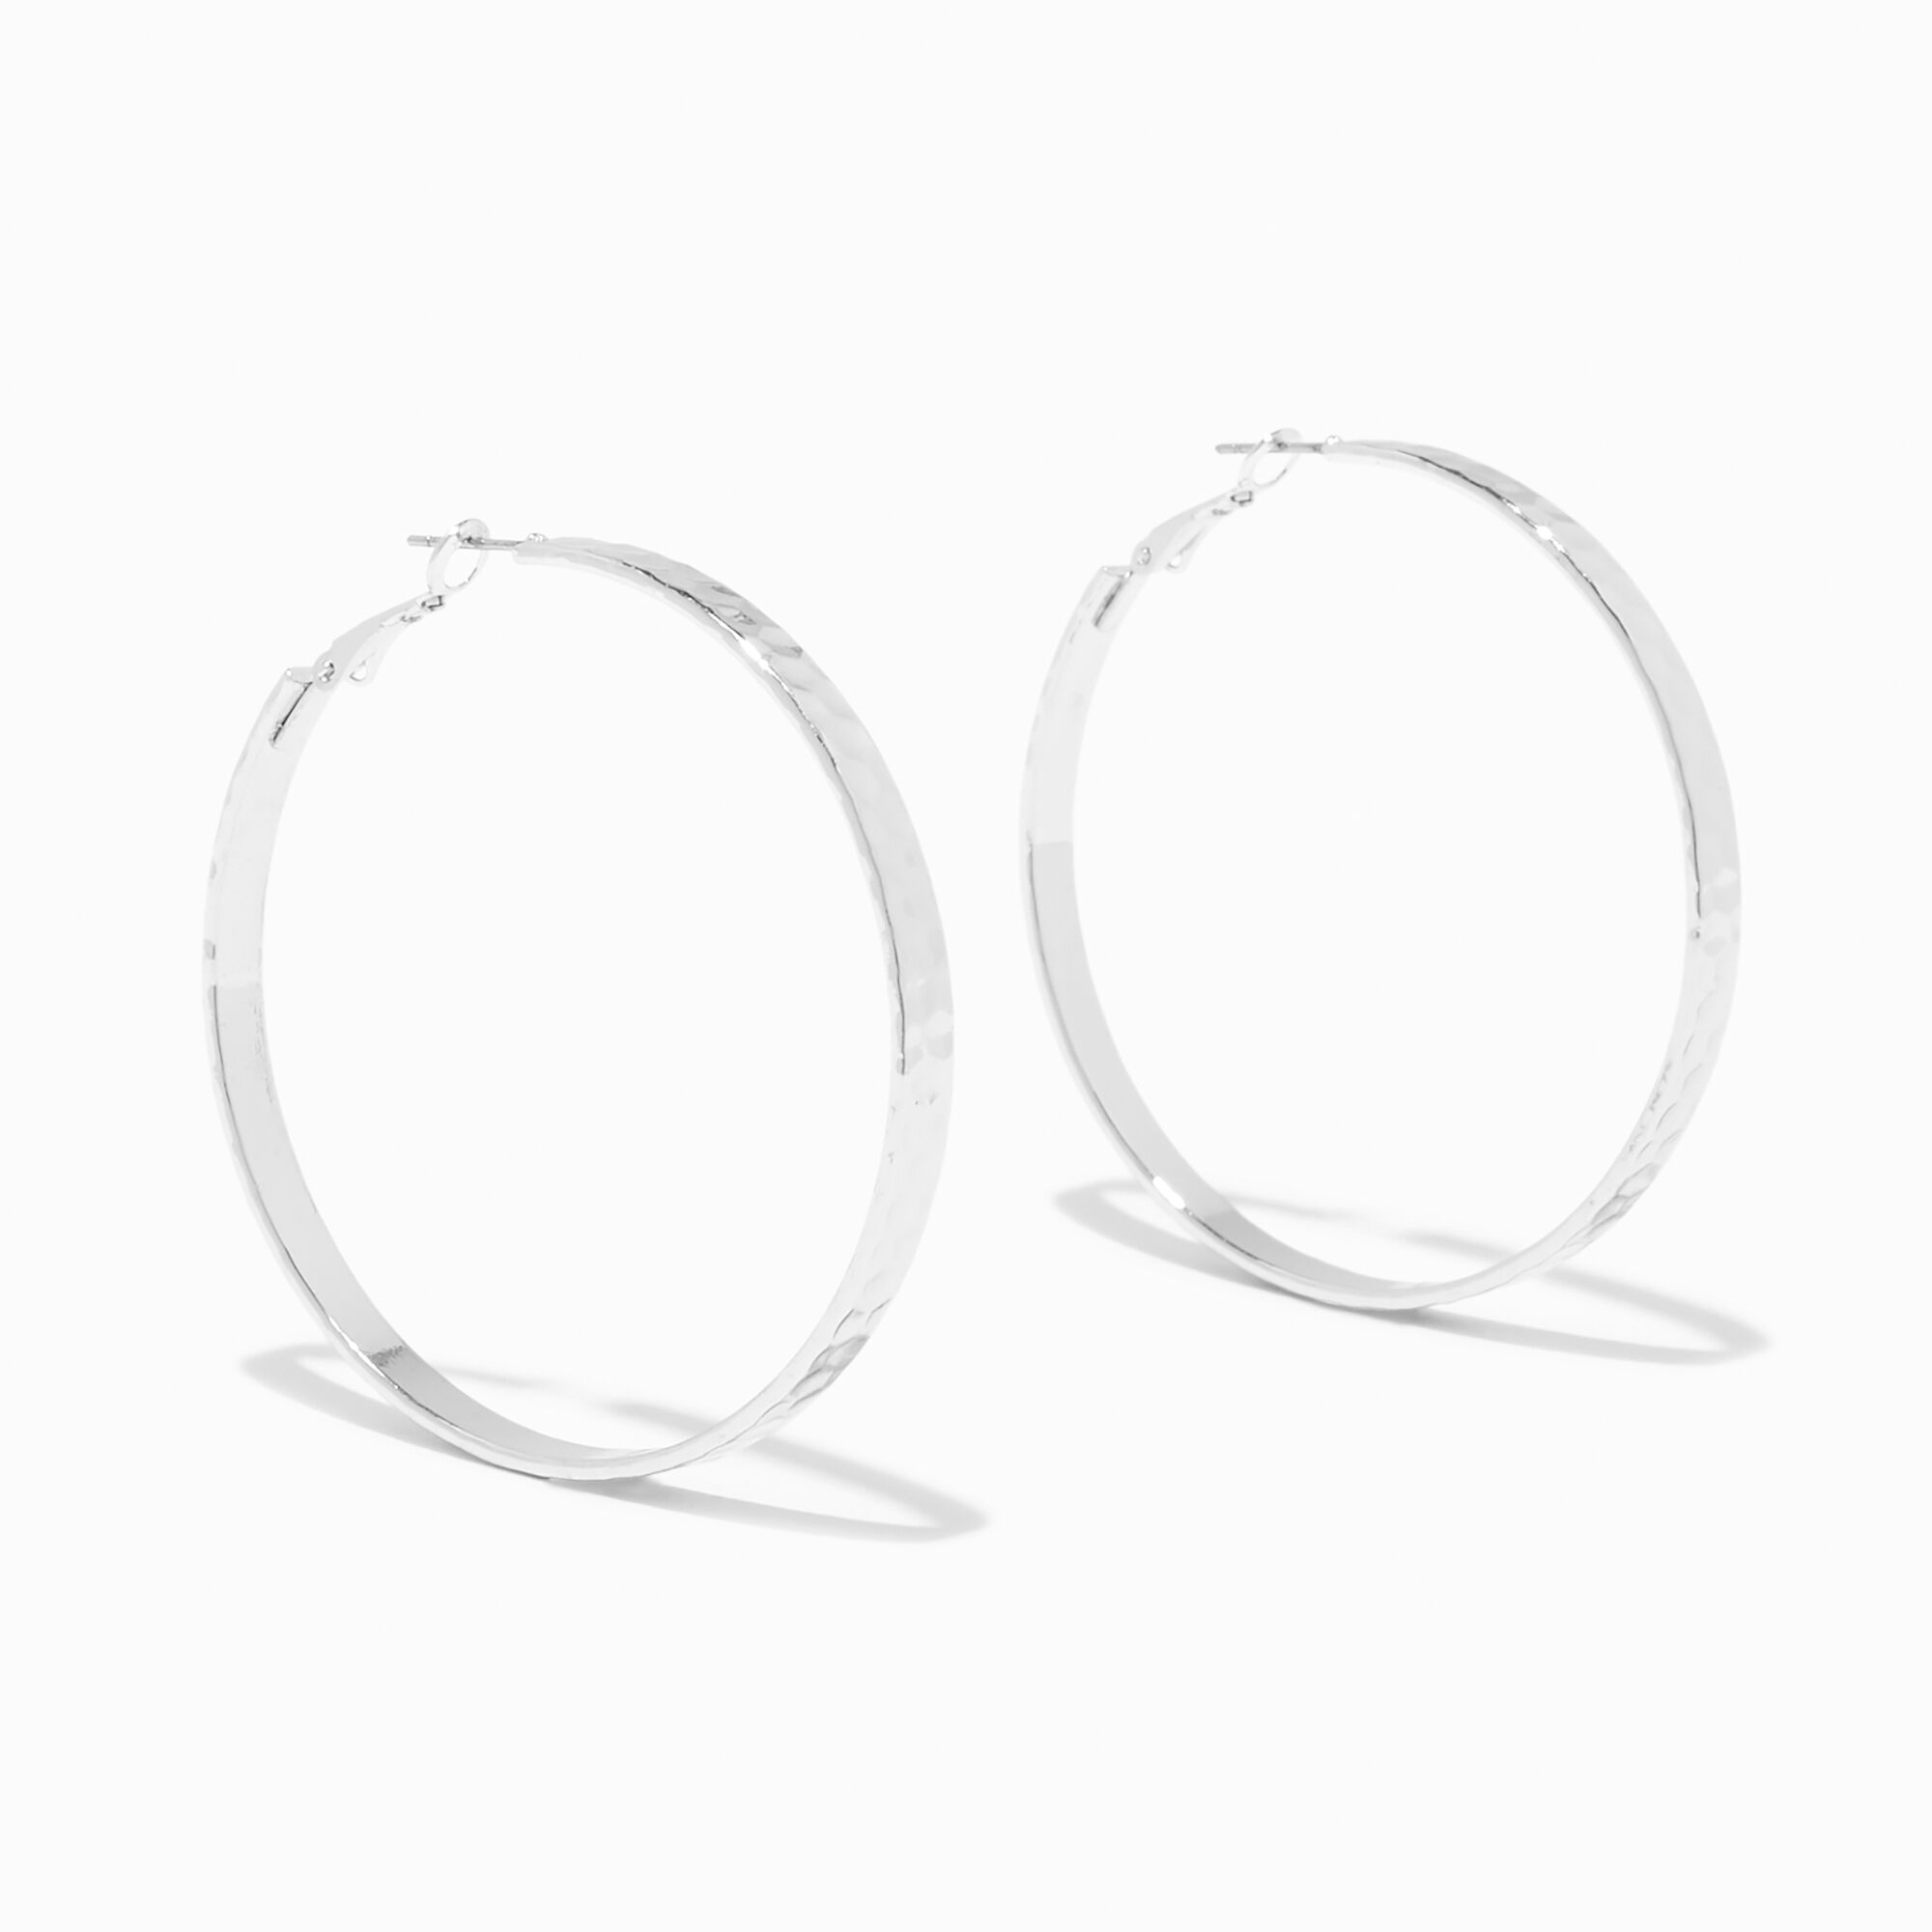 View Claires Tone 60MM Hammered Hoop Earrings Silver information